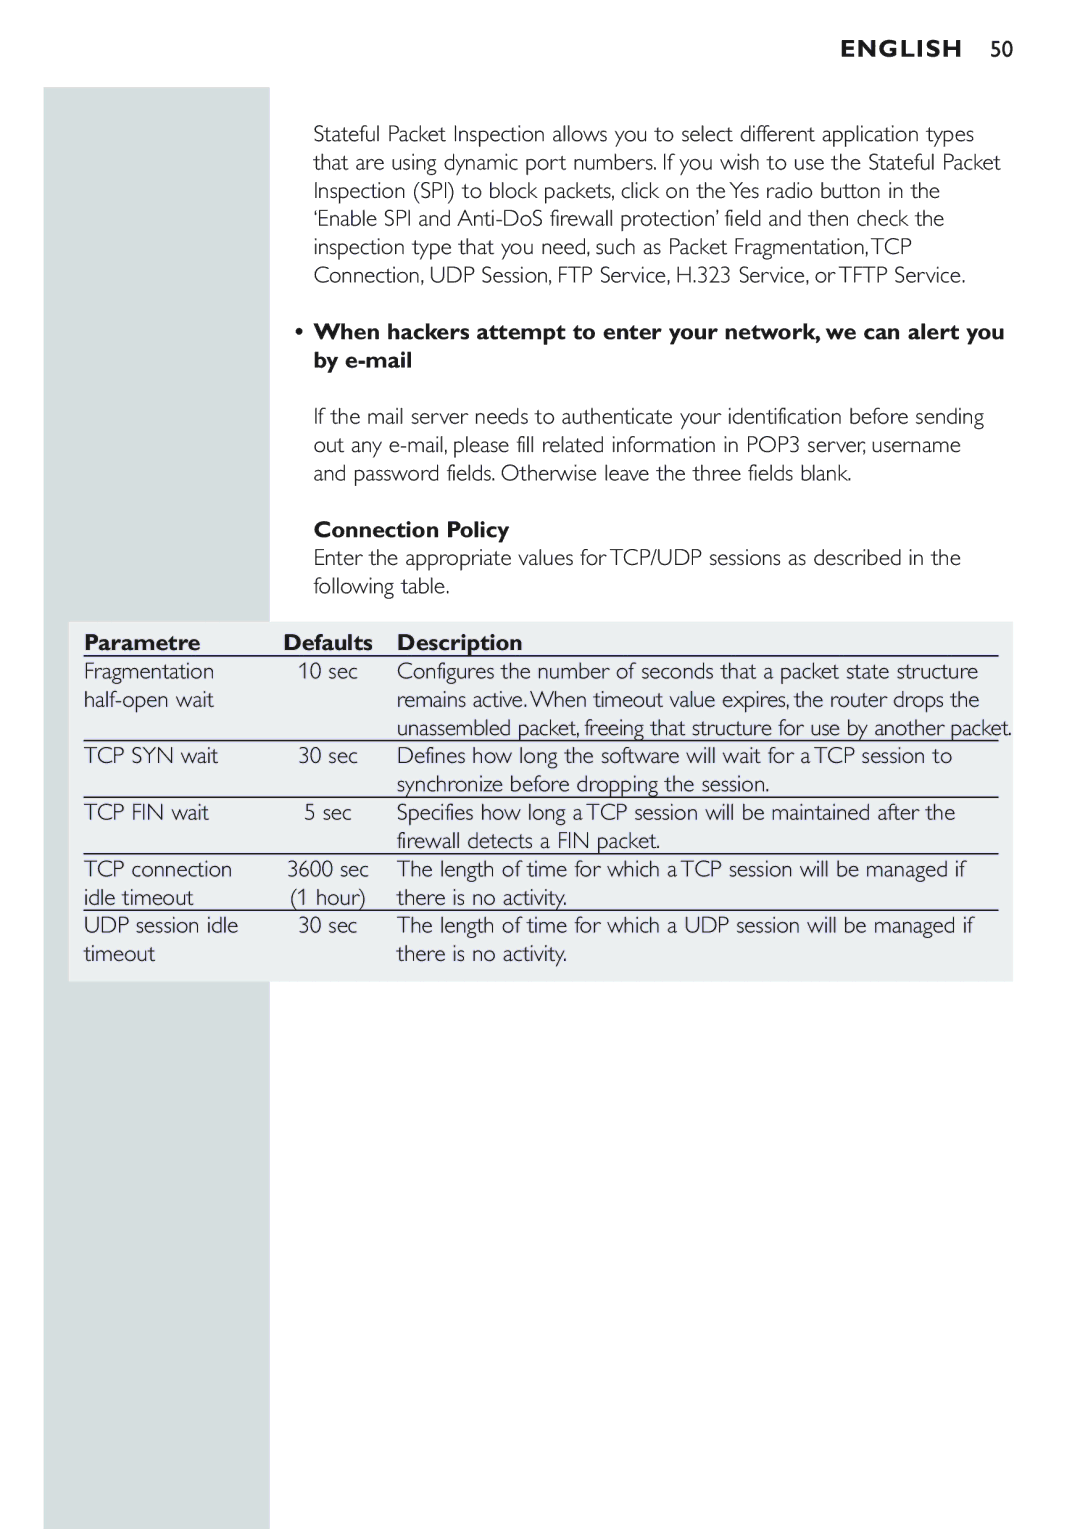 Philips CPWBS154 manual Connection Policy, Parametre Defaults Description 